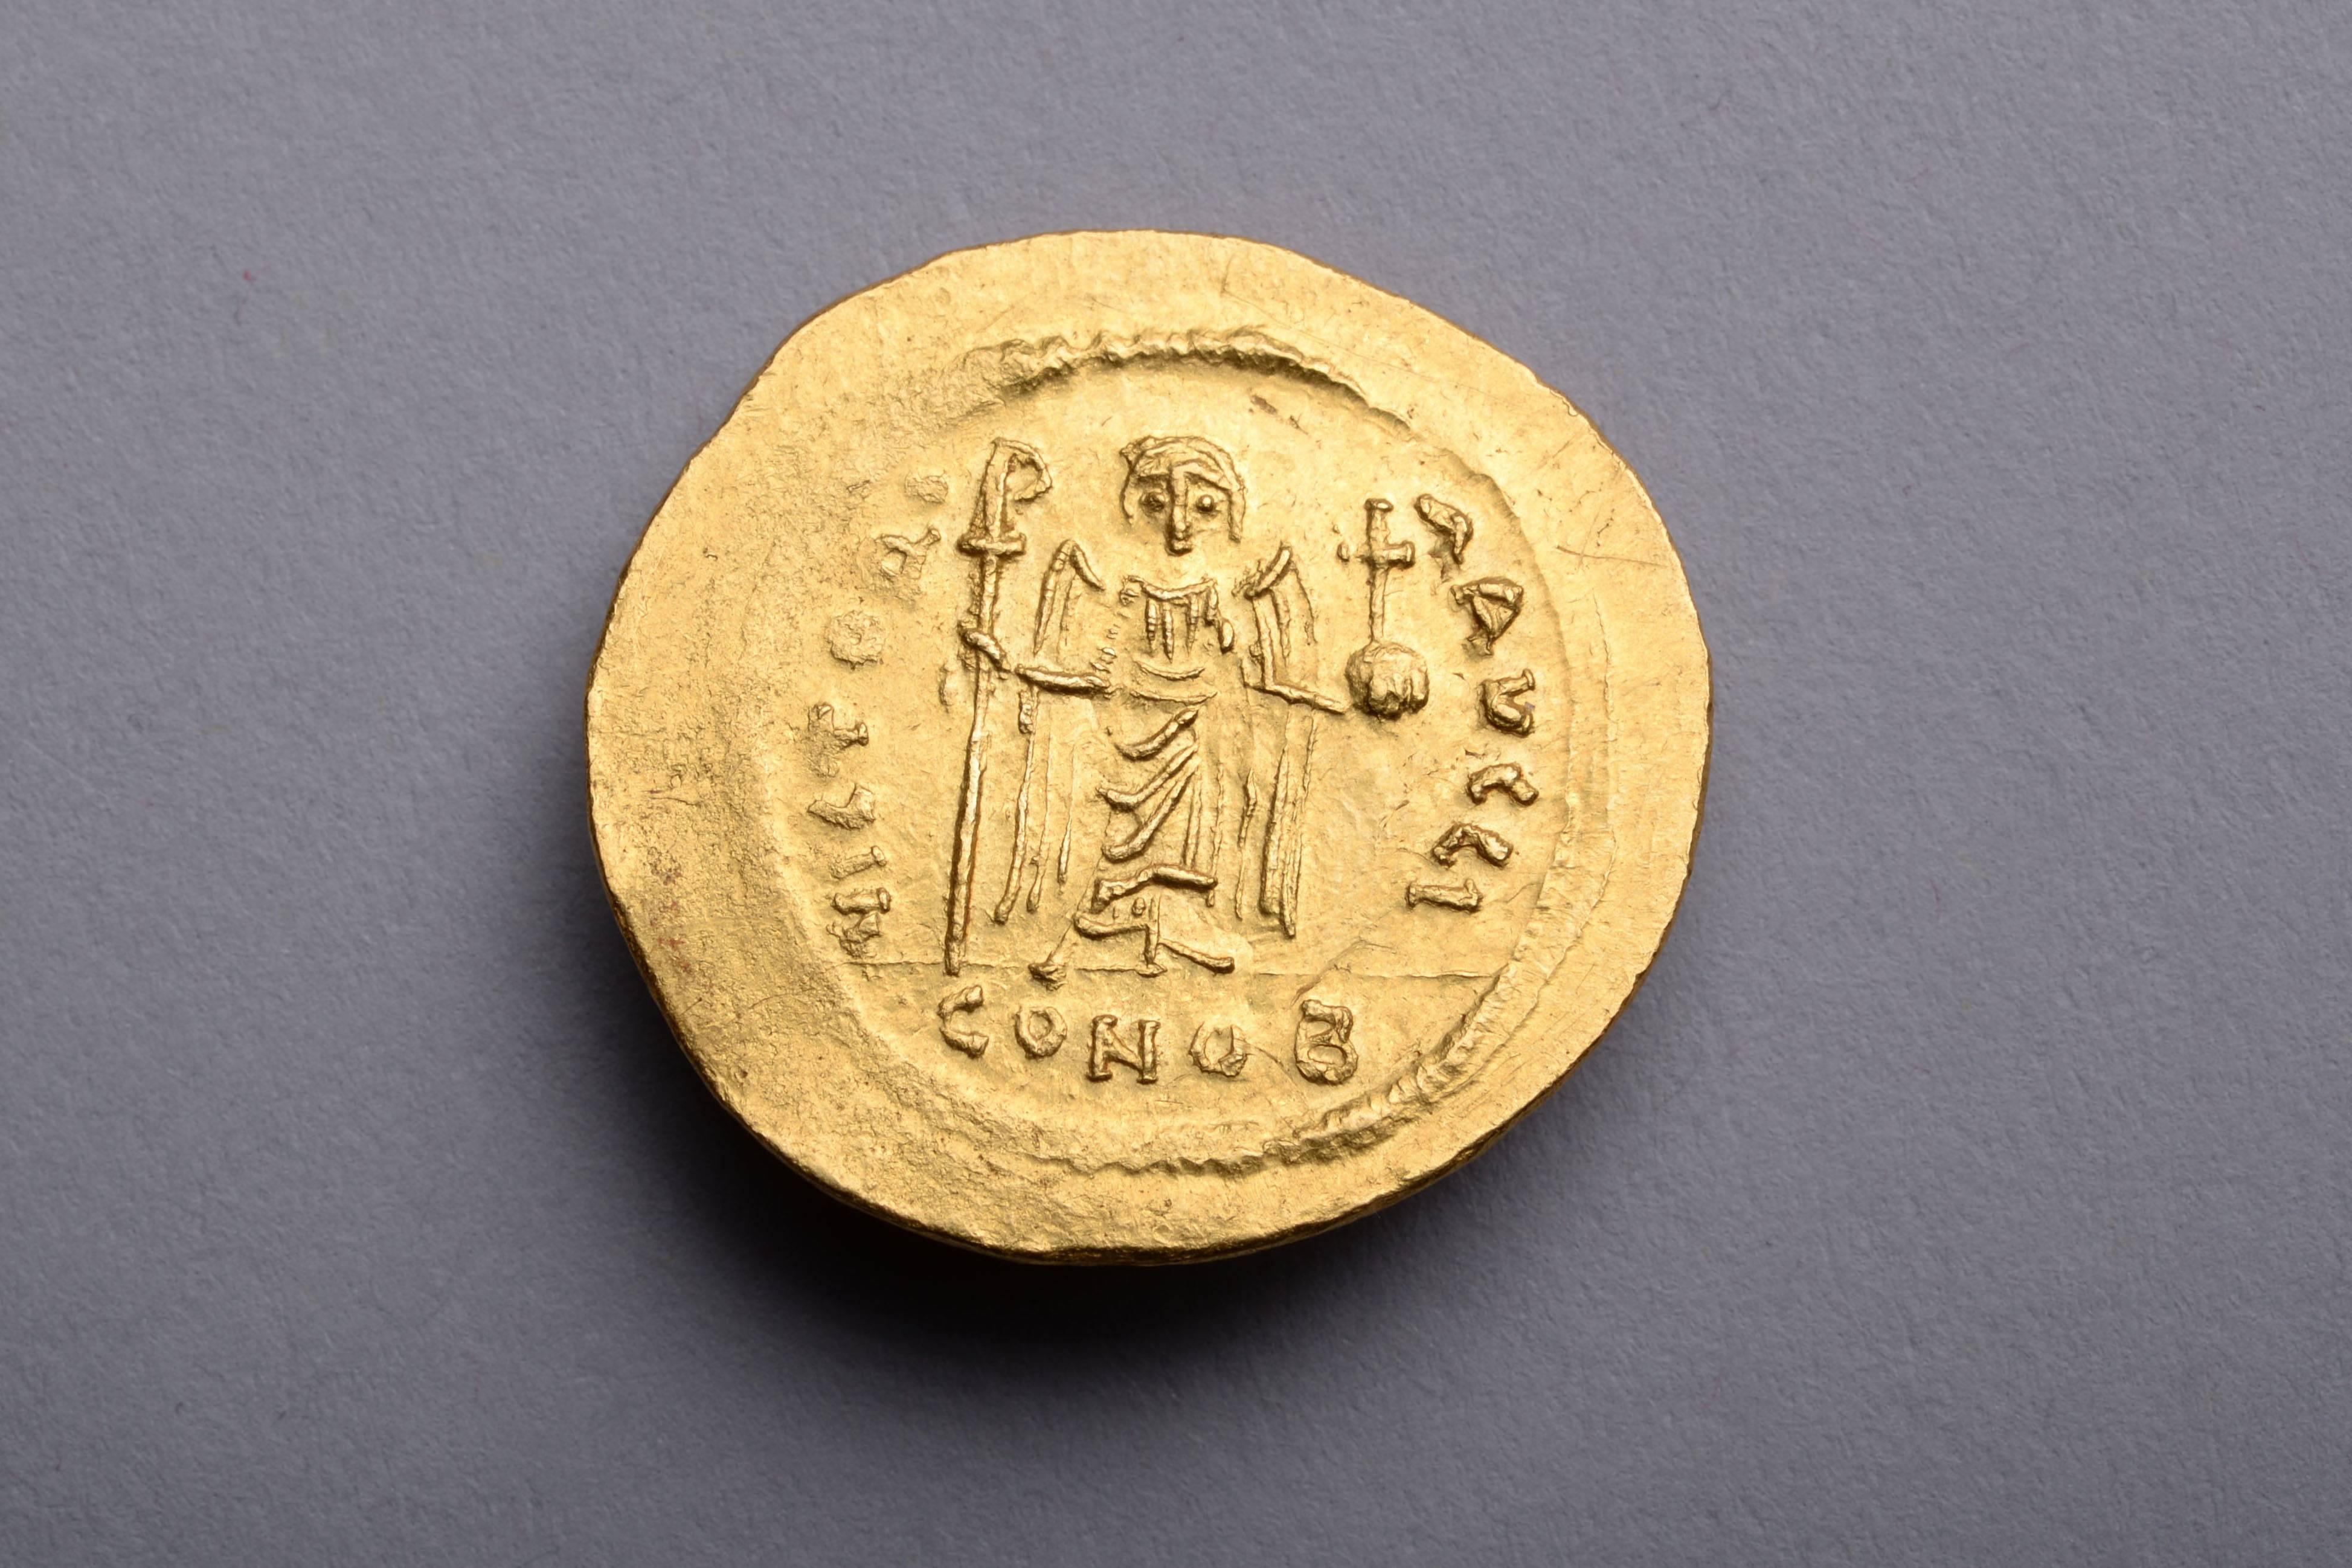 A highly unusual Byzantine solidus, boasting the finest portrait of Emperor Phocas that we have ever seen.

A gold solidus issued under Emperor Phocas (or Focas), at the Constantinople mint, in 603 AD.

The obverse with a remarkable portrait